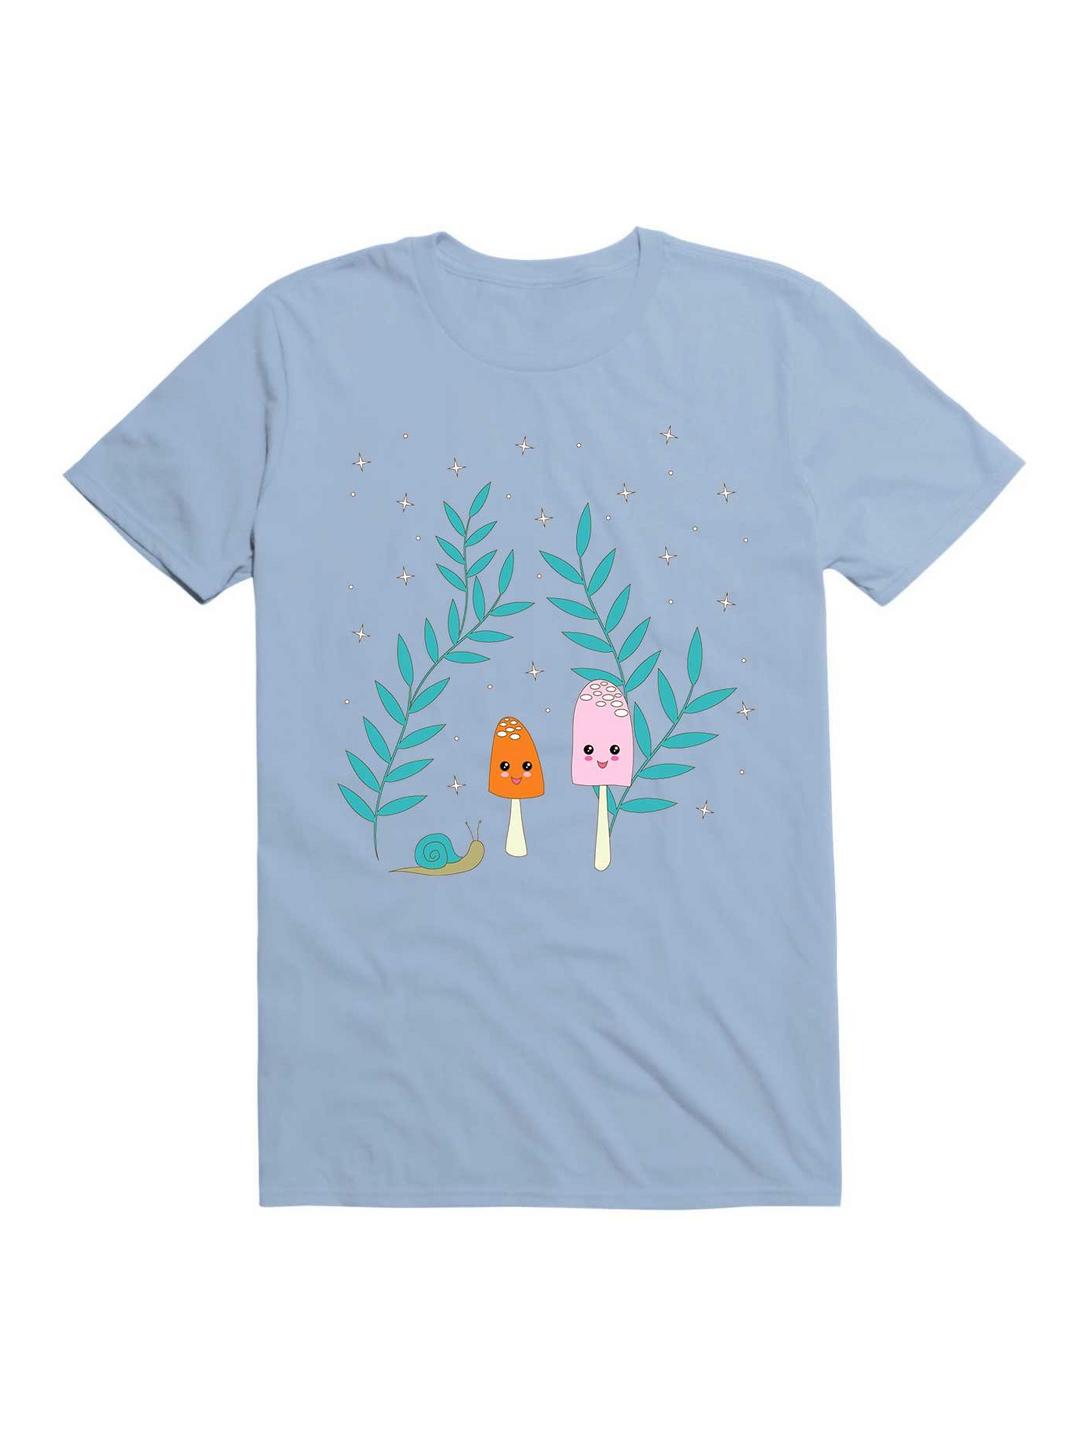 Kawaii Mushrooms In The Forest With Snail T-Shirt, LIGHT BLUE, hi-res